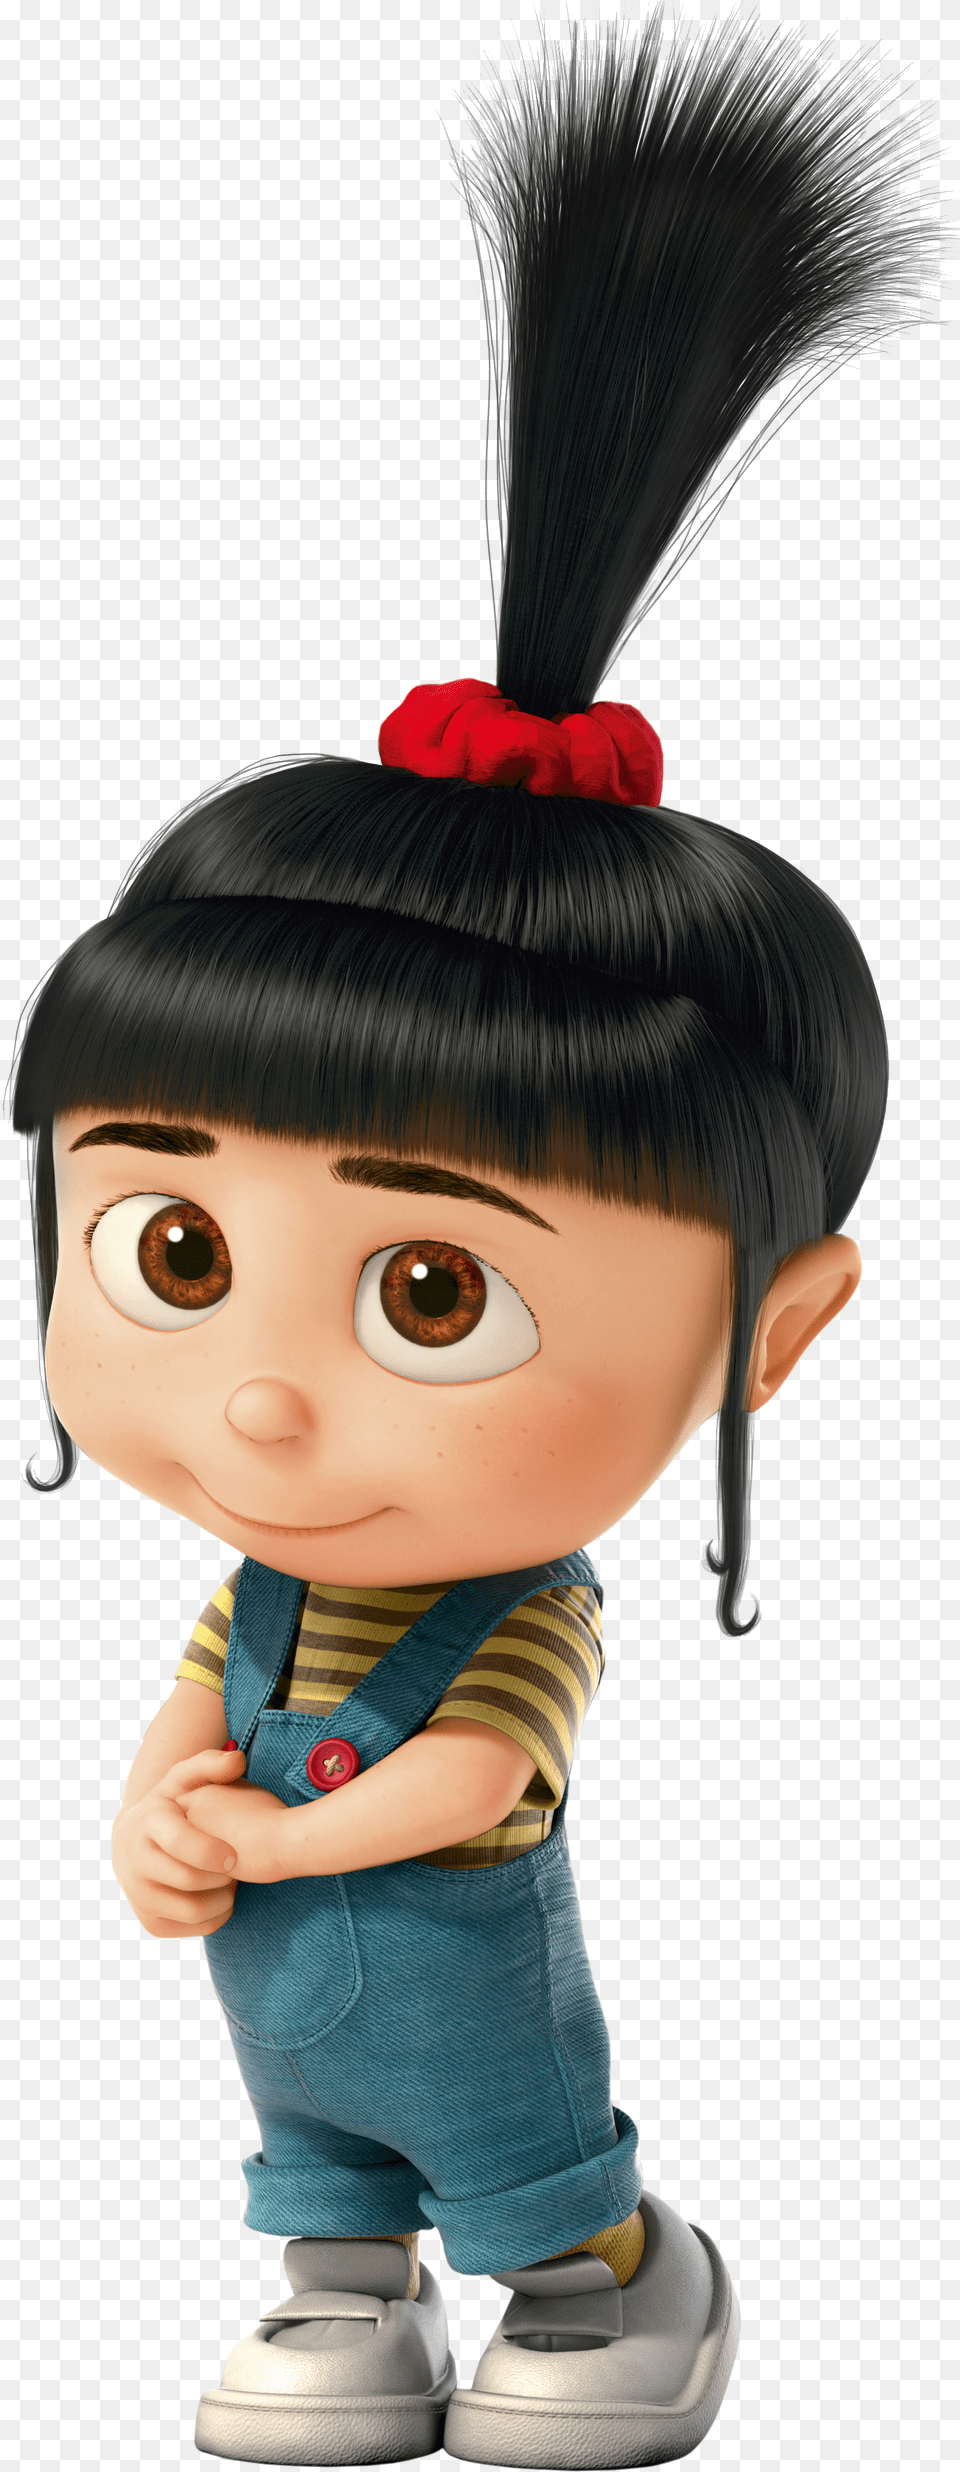 Despicable Me Logo, Doll, Toy, Face, Head Png Image